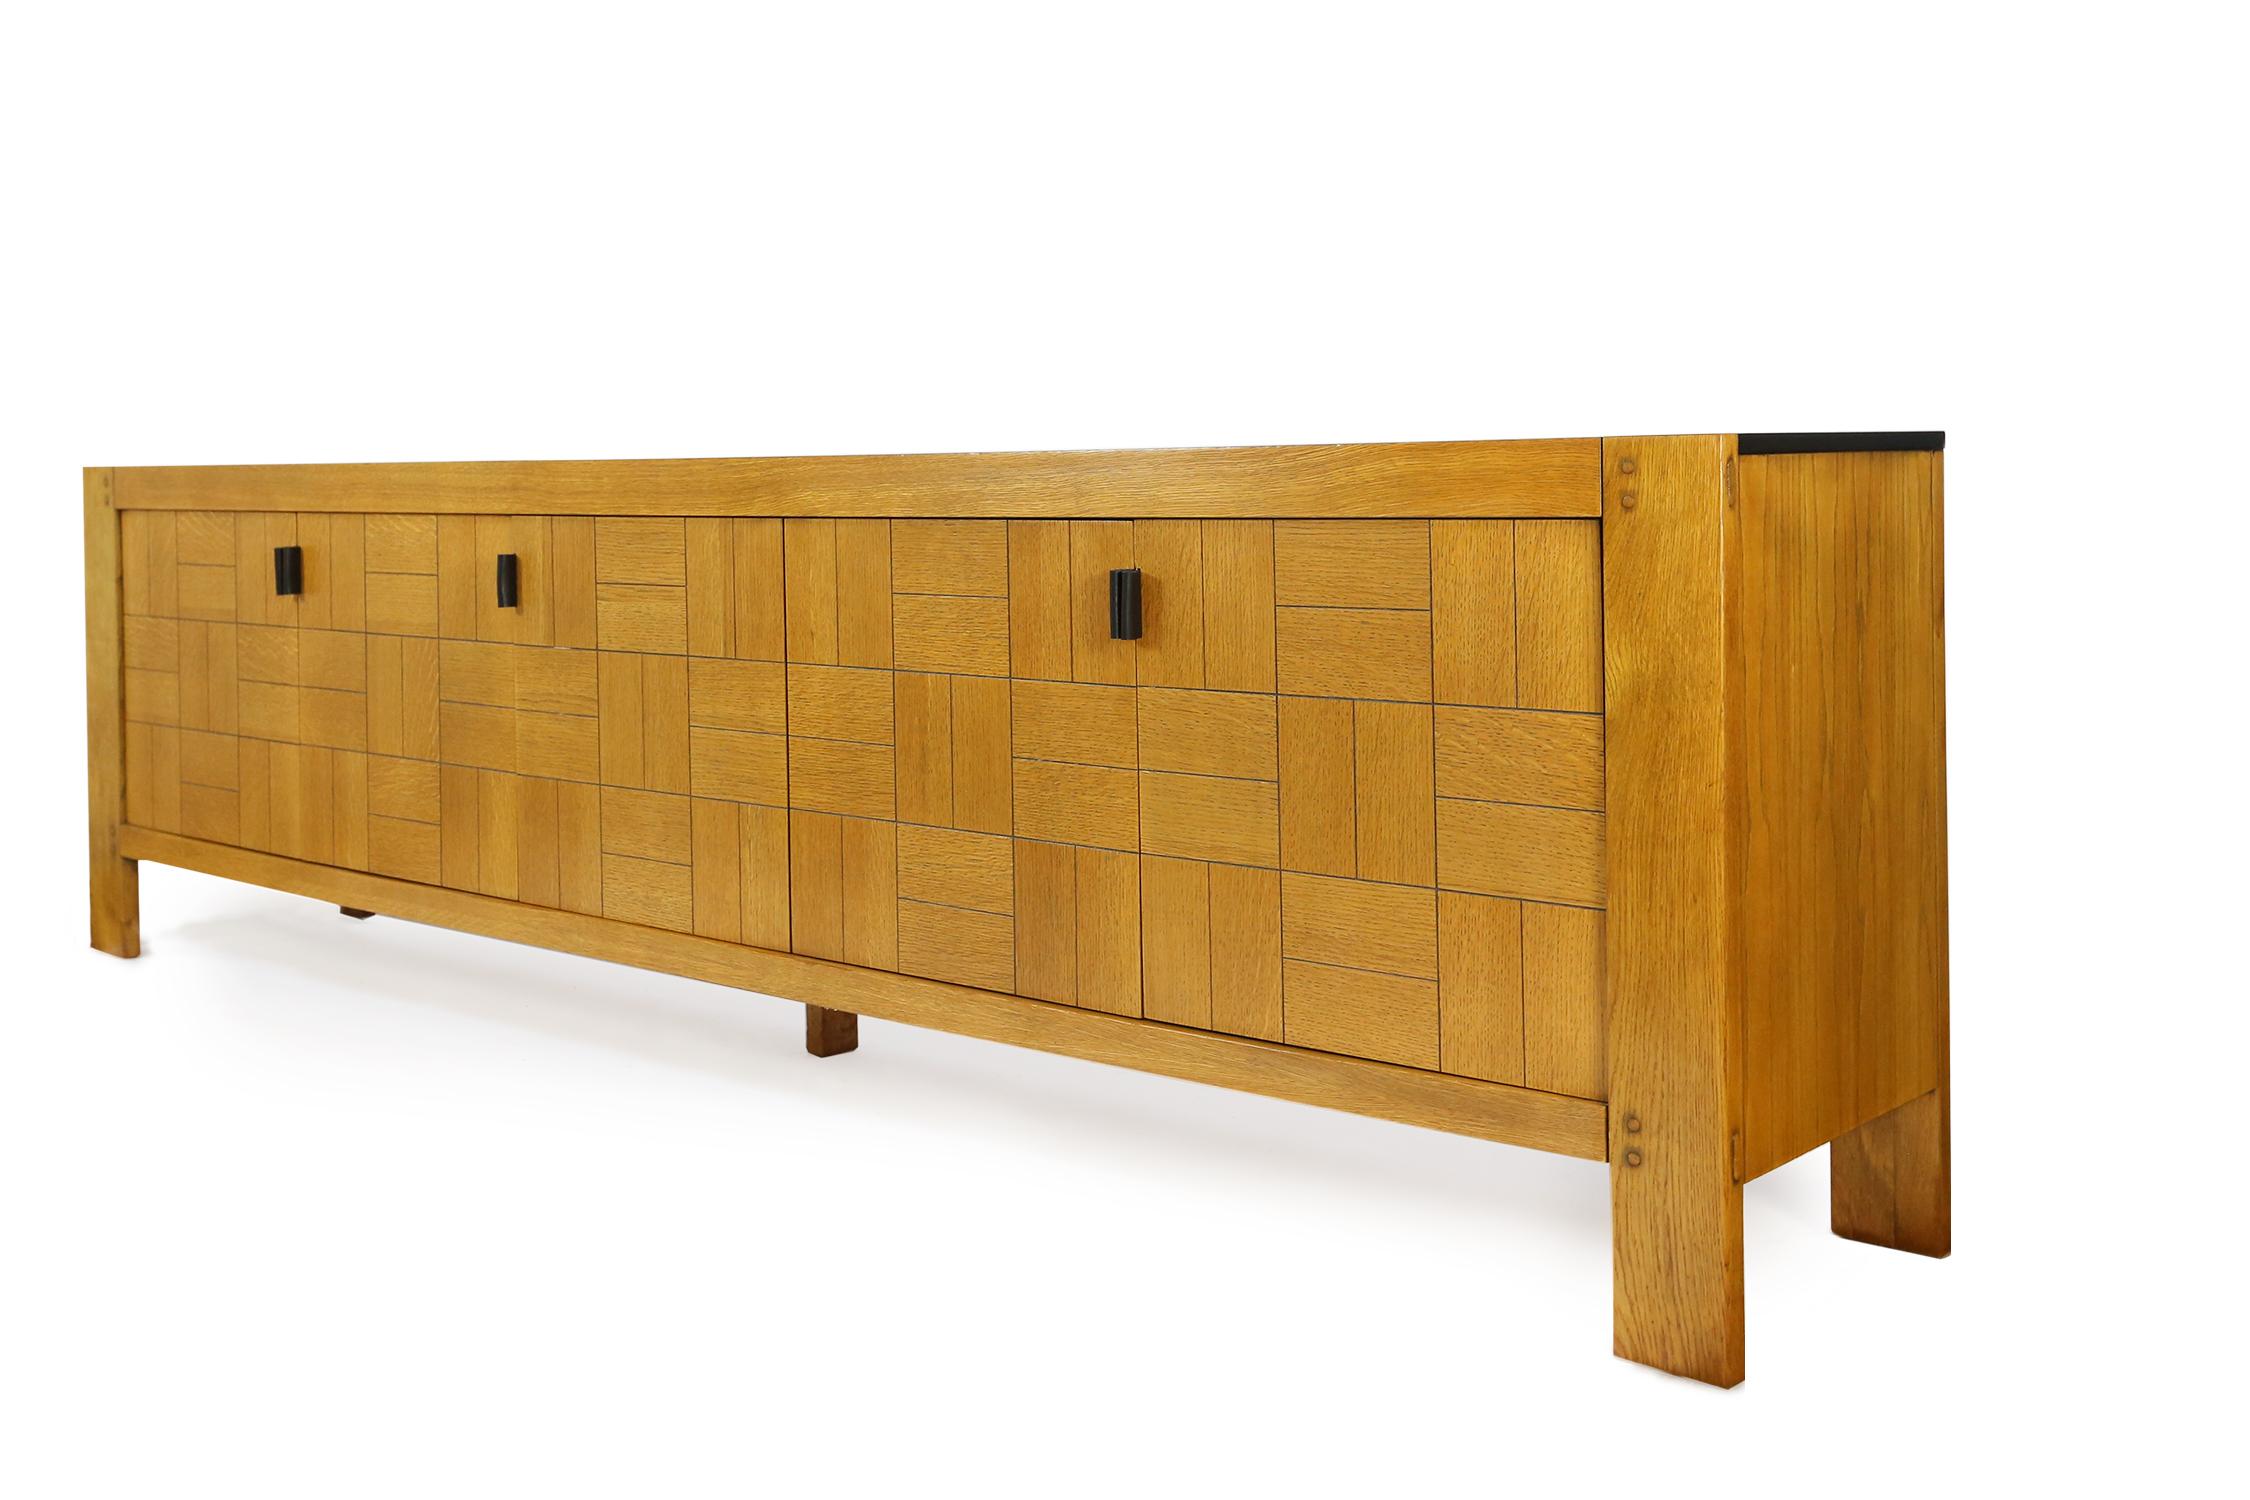 Brutalist sideboard executed in oak. The decorative doors are finished in way that a patchwork is created with a combination of horizontal and vertical inlayed grained oak tiles. The handles are made of black leather and while opening the doors